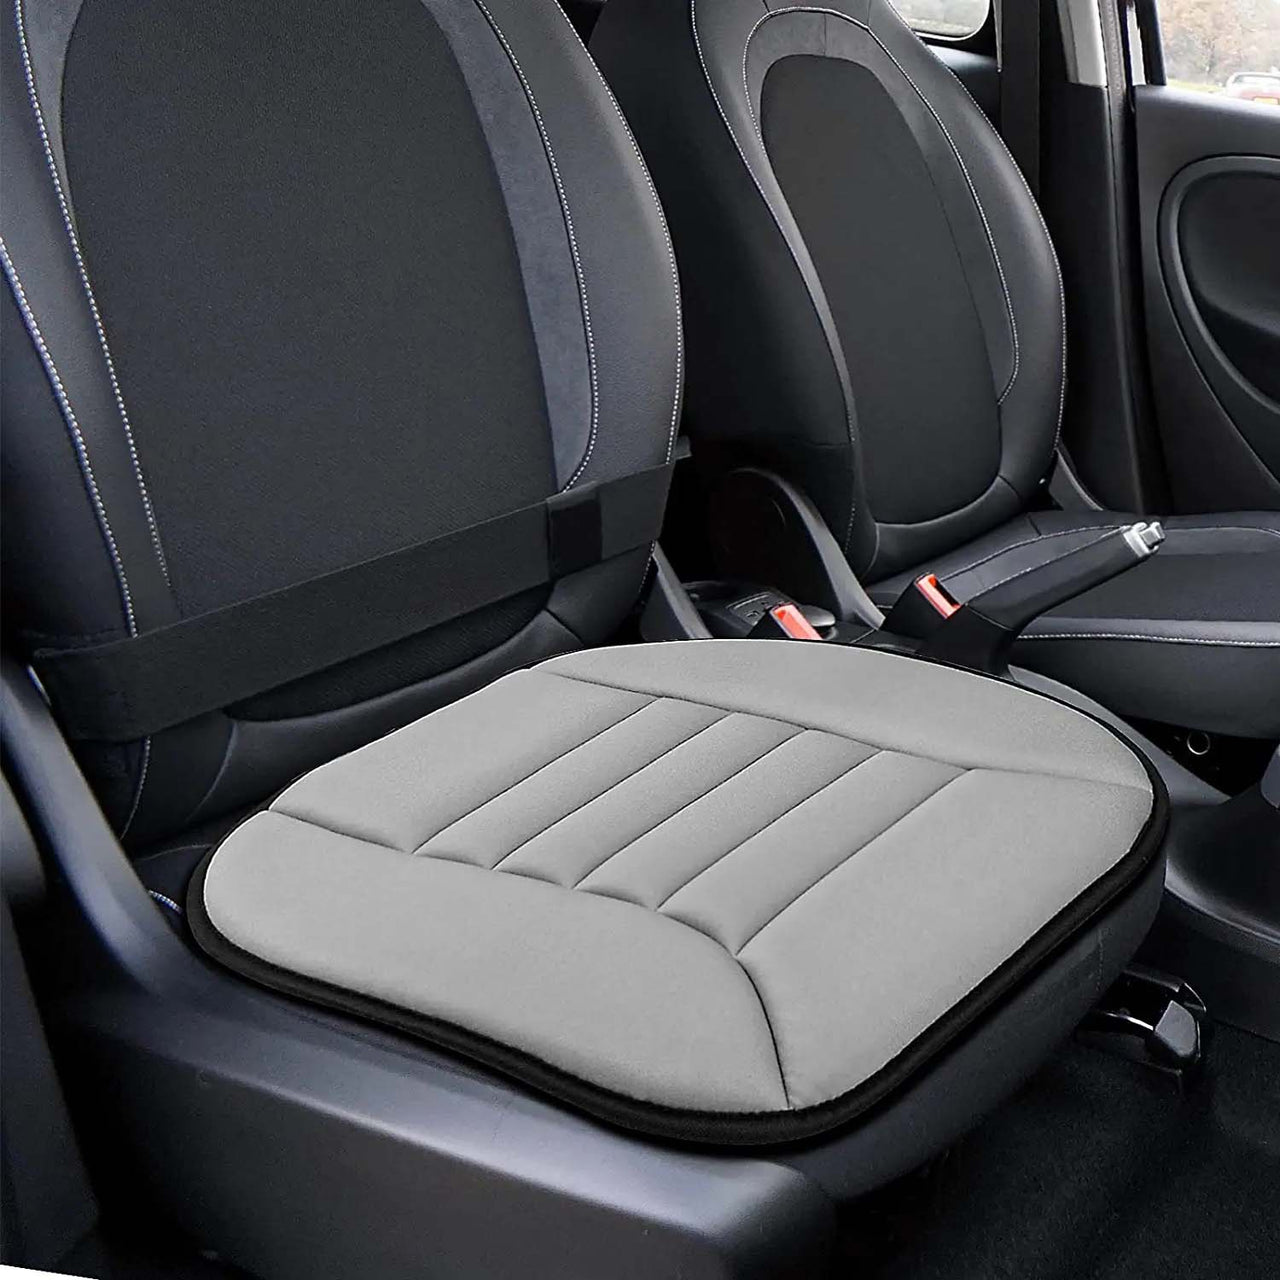 Car Seat Cushion with 1.2inch Comfort Memory Foam, Custom Fit For Your Cars, Seat Cushion for Car and Office Chair CC19989